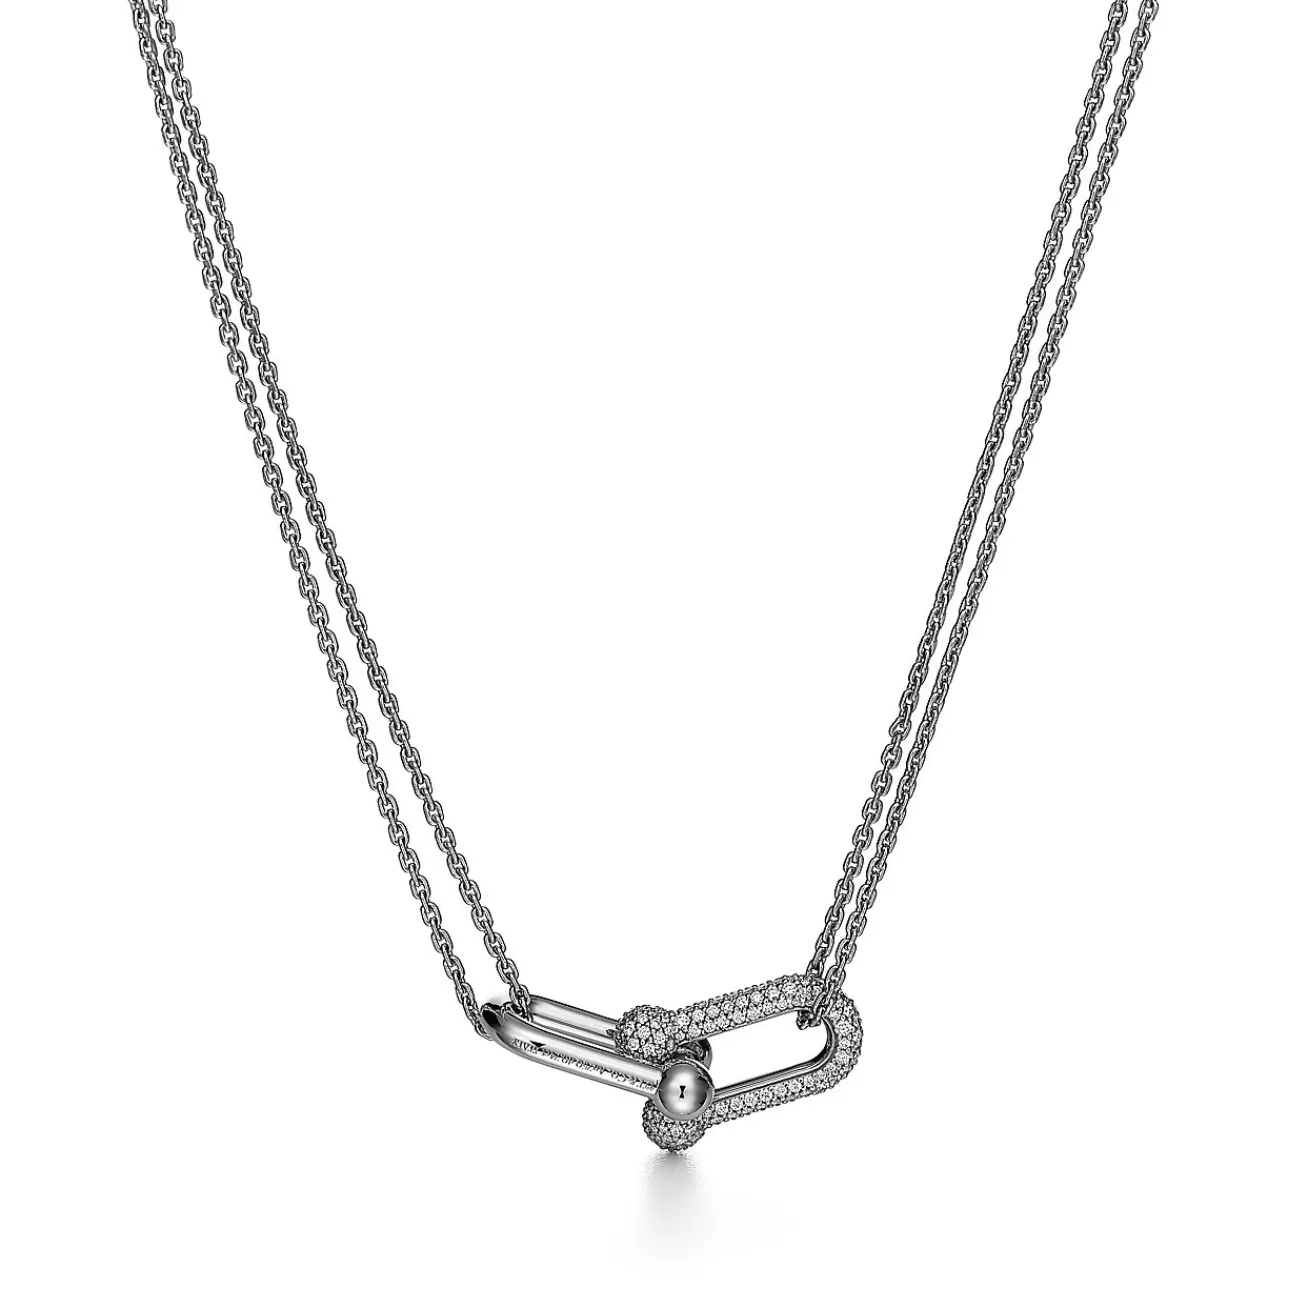 Tiffany & Co. Tiffany HardWear Large Double Link Pendant in White Gold with Pavé Diamonds | ^ Necklaces & Pendants | Diamond Jewelry